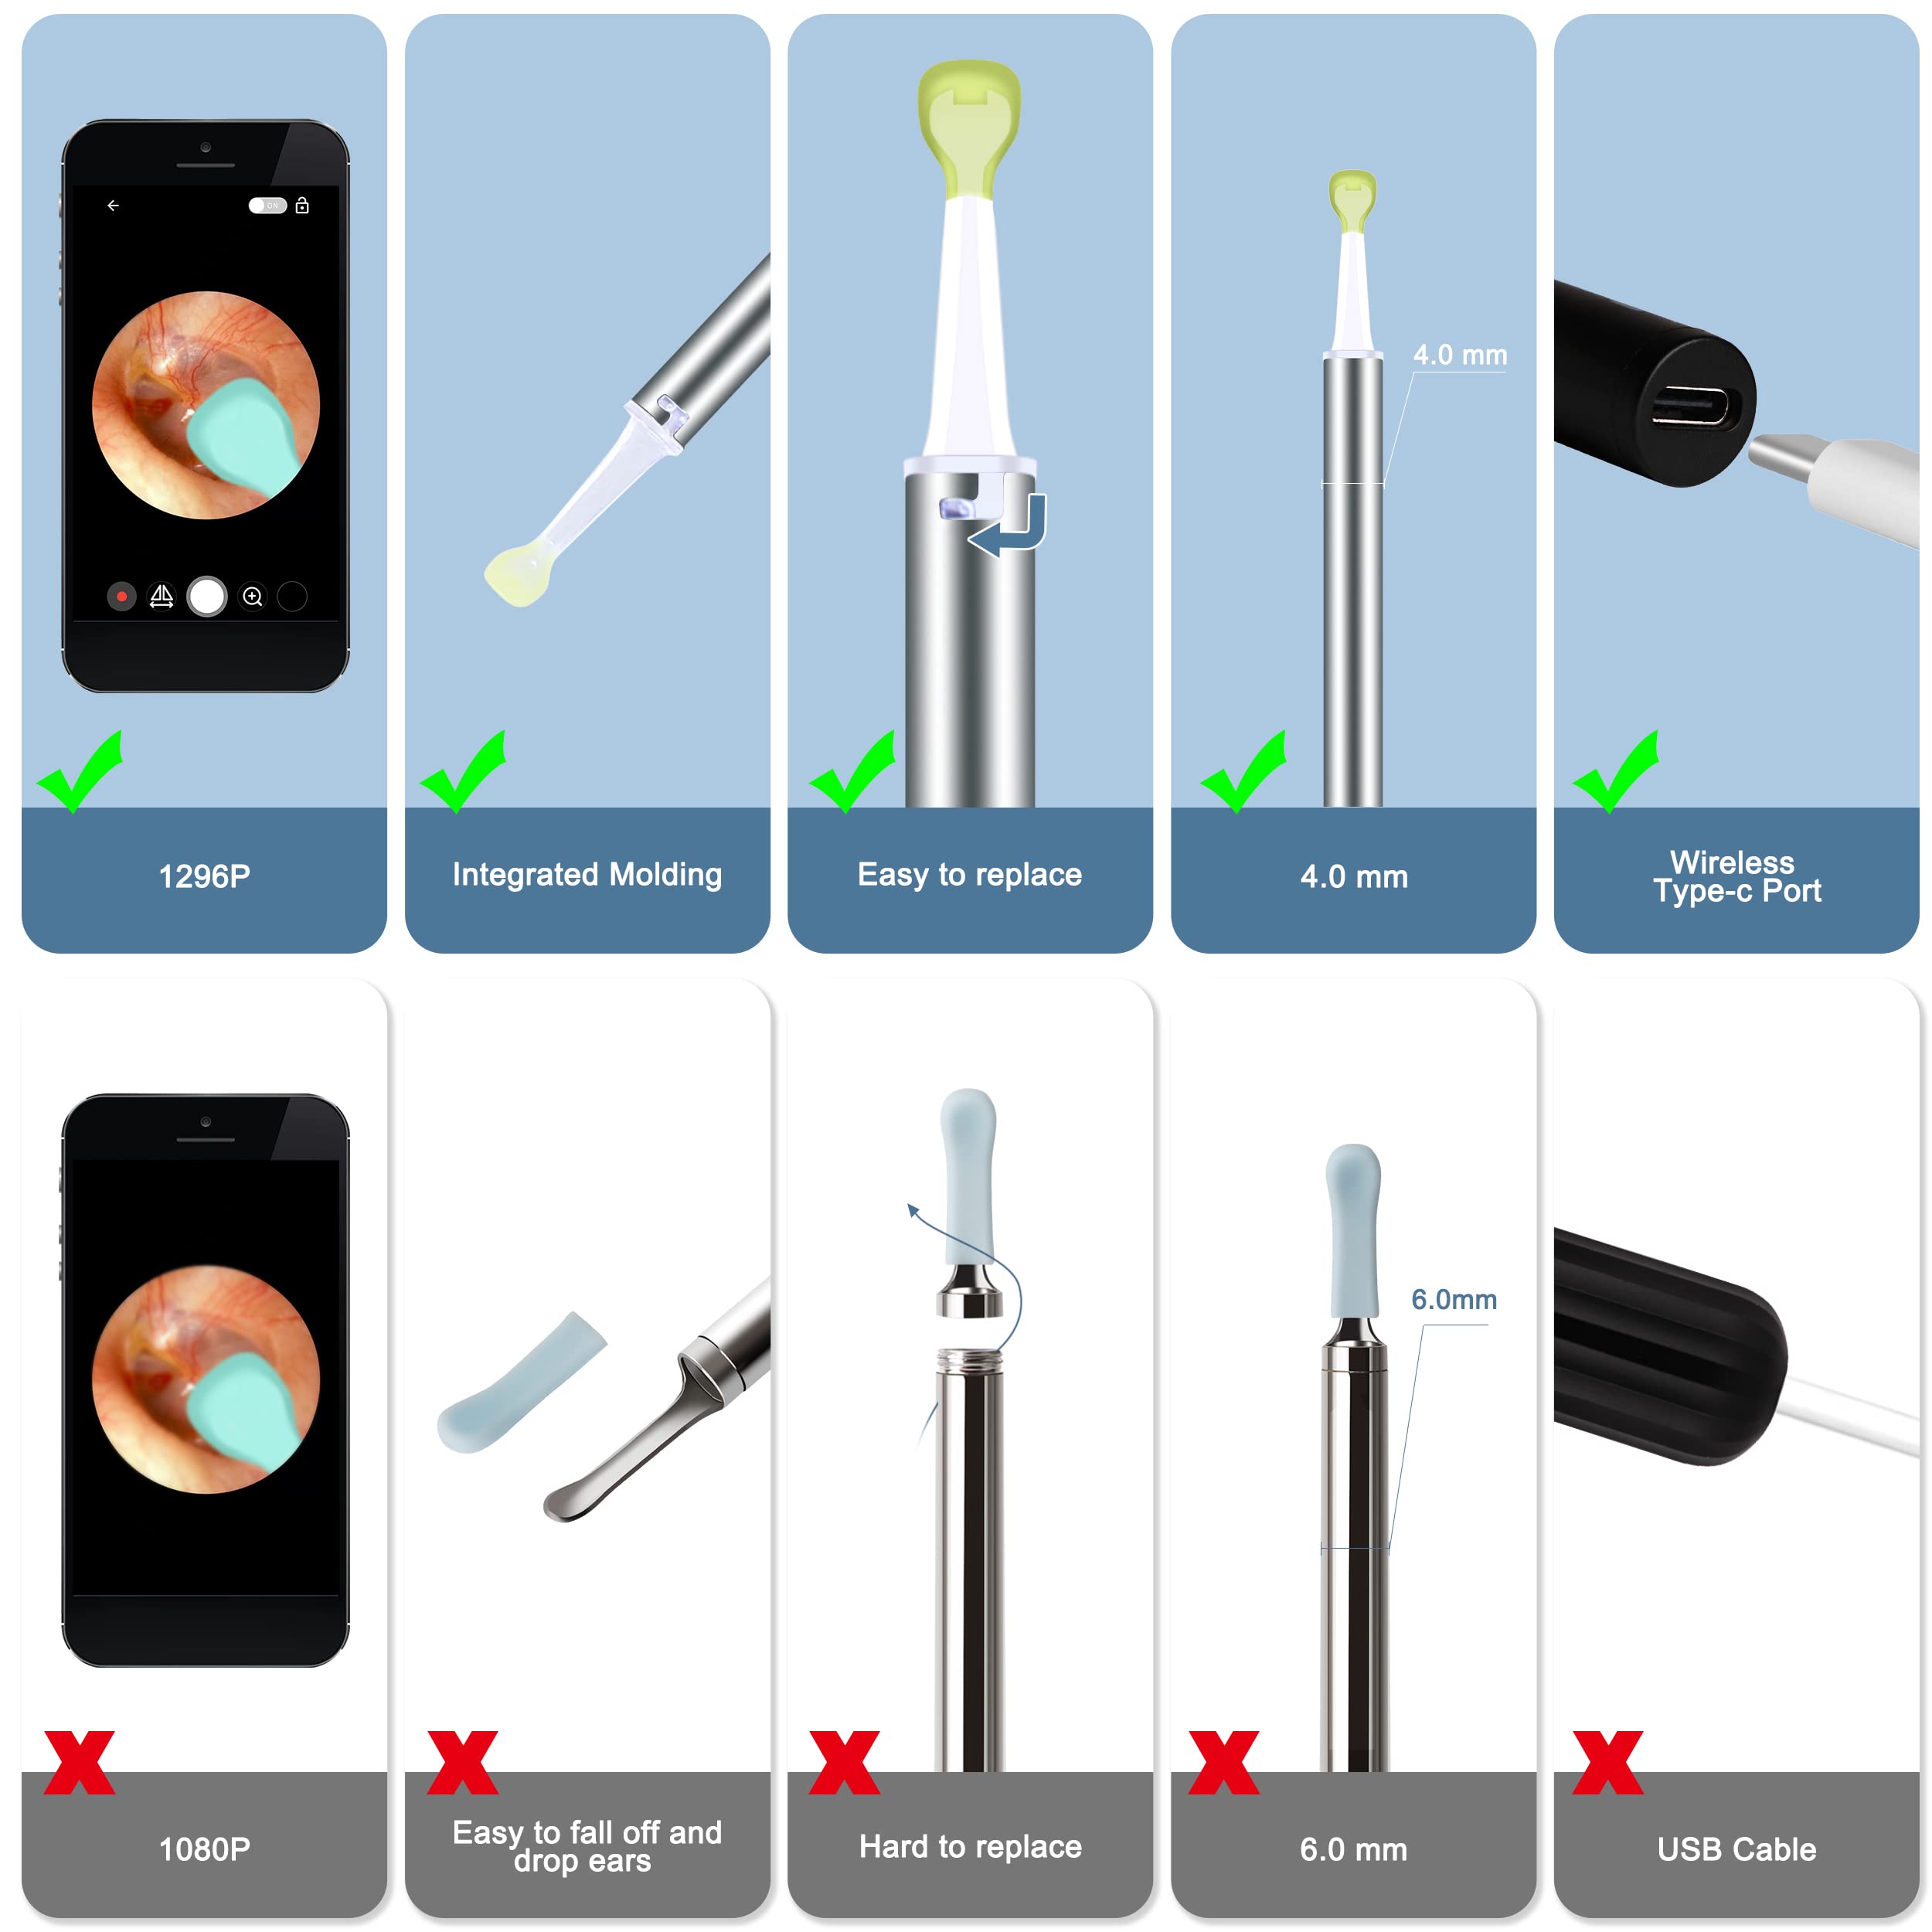 Ear Wax Removal Tool, Wireless WiFi Ear Cleaner with 1296P FHD Camera, Earwax Remover, Ear Scope Otoscope with Light, Ear Cleaning Kit Smart Visual for iPhone, iPad & Android